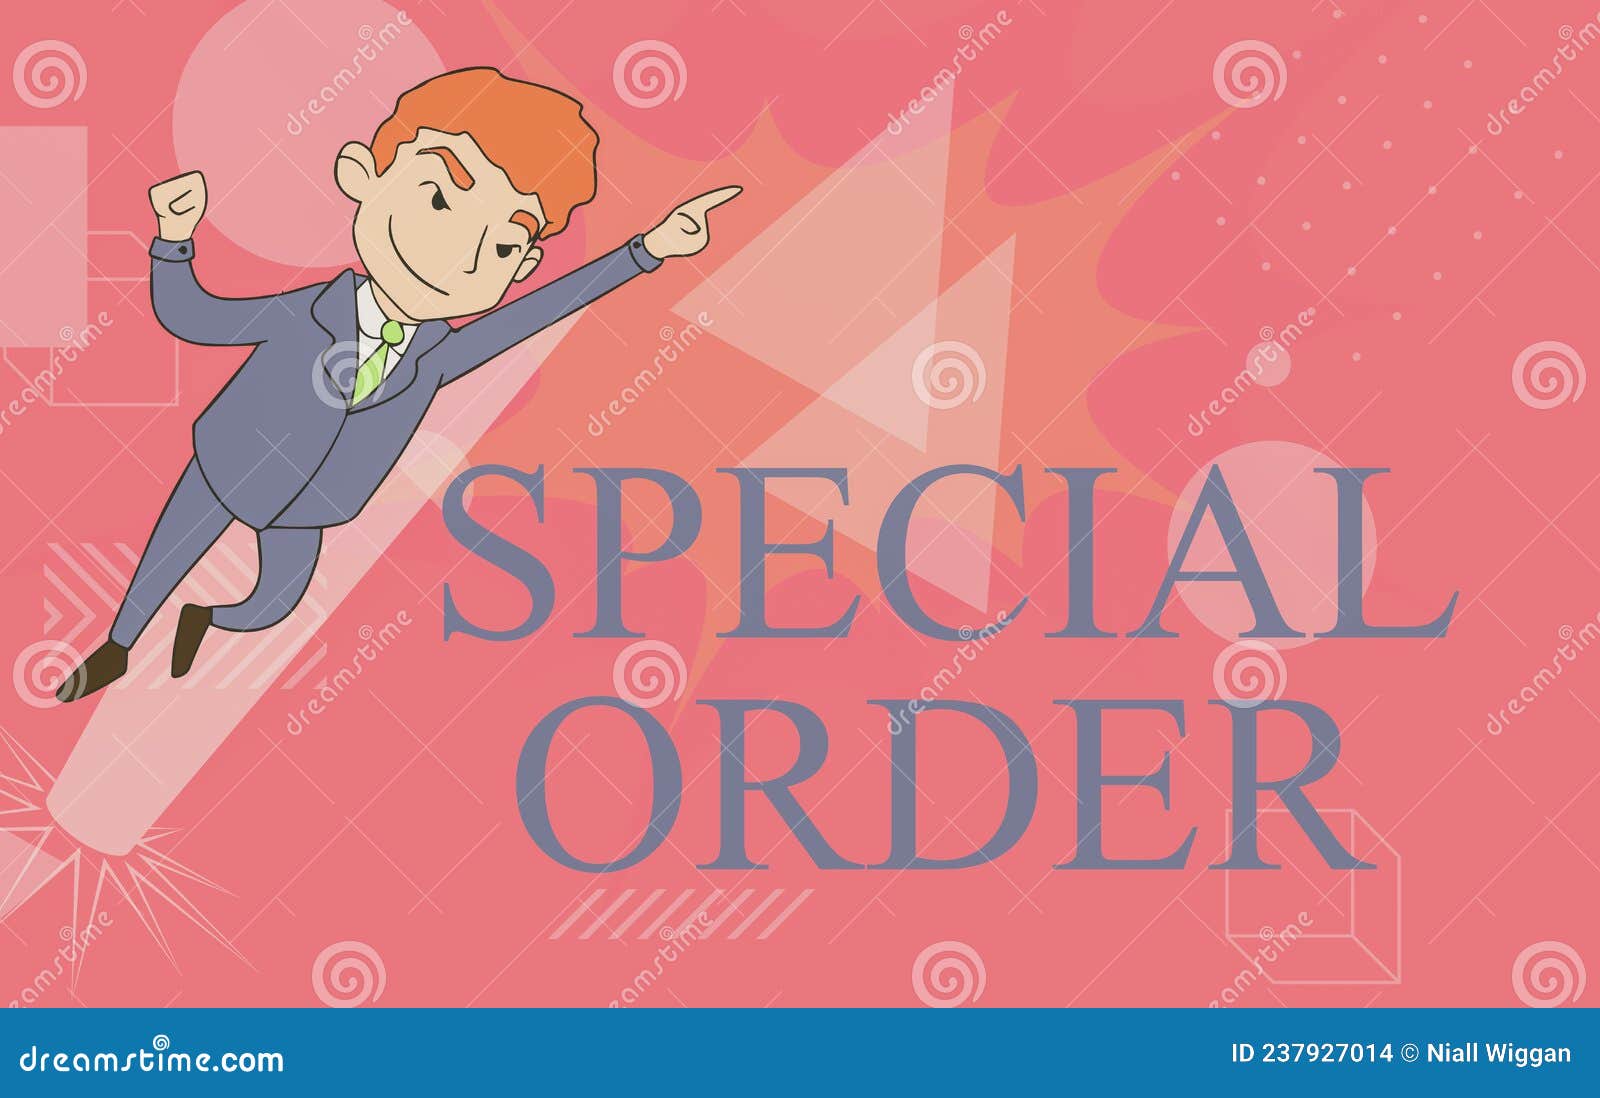 sign displaying special order. concept meaning specific item requested a routine memo by military headquarters man